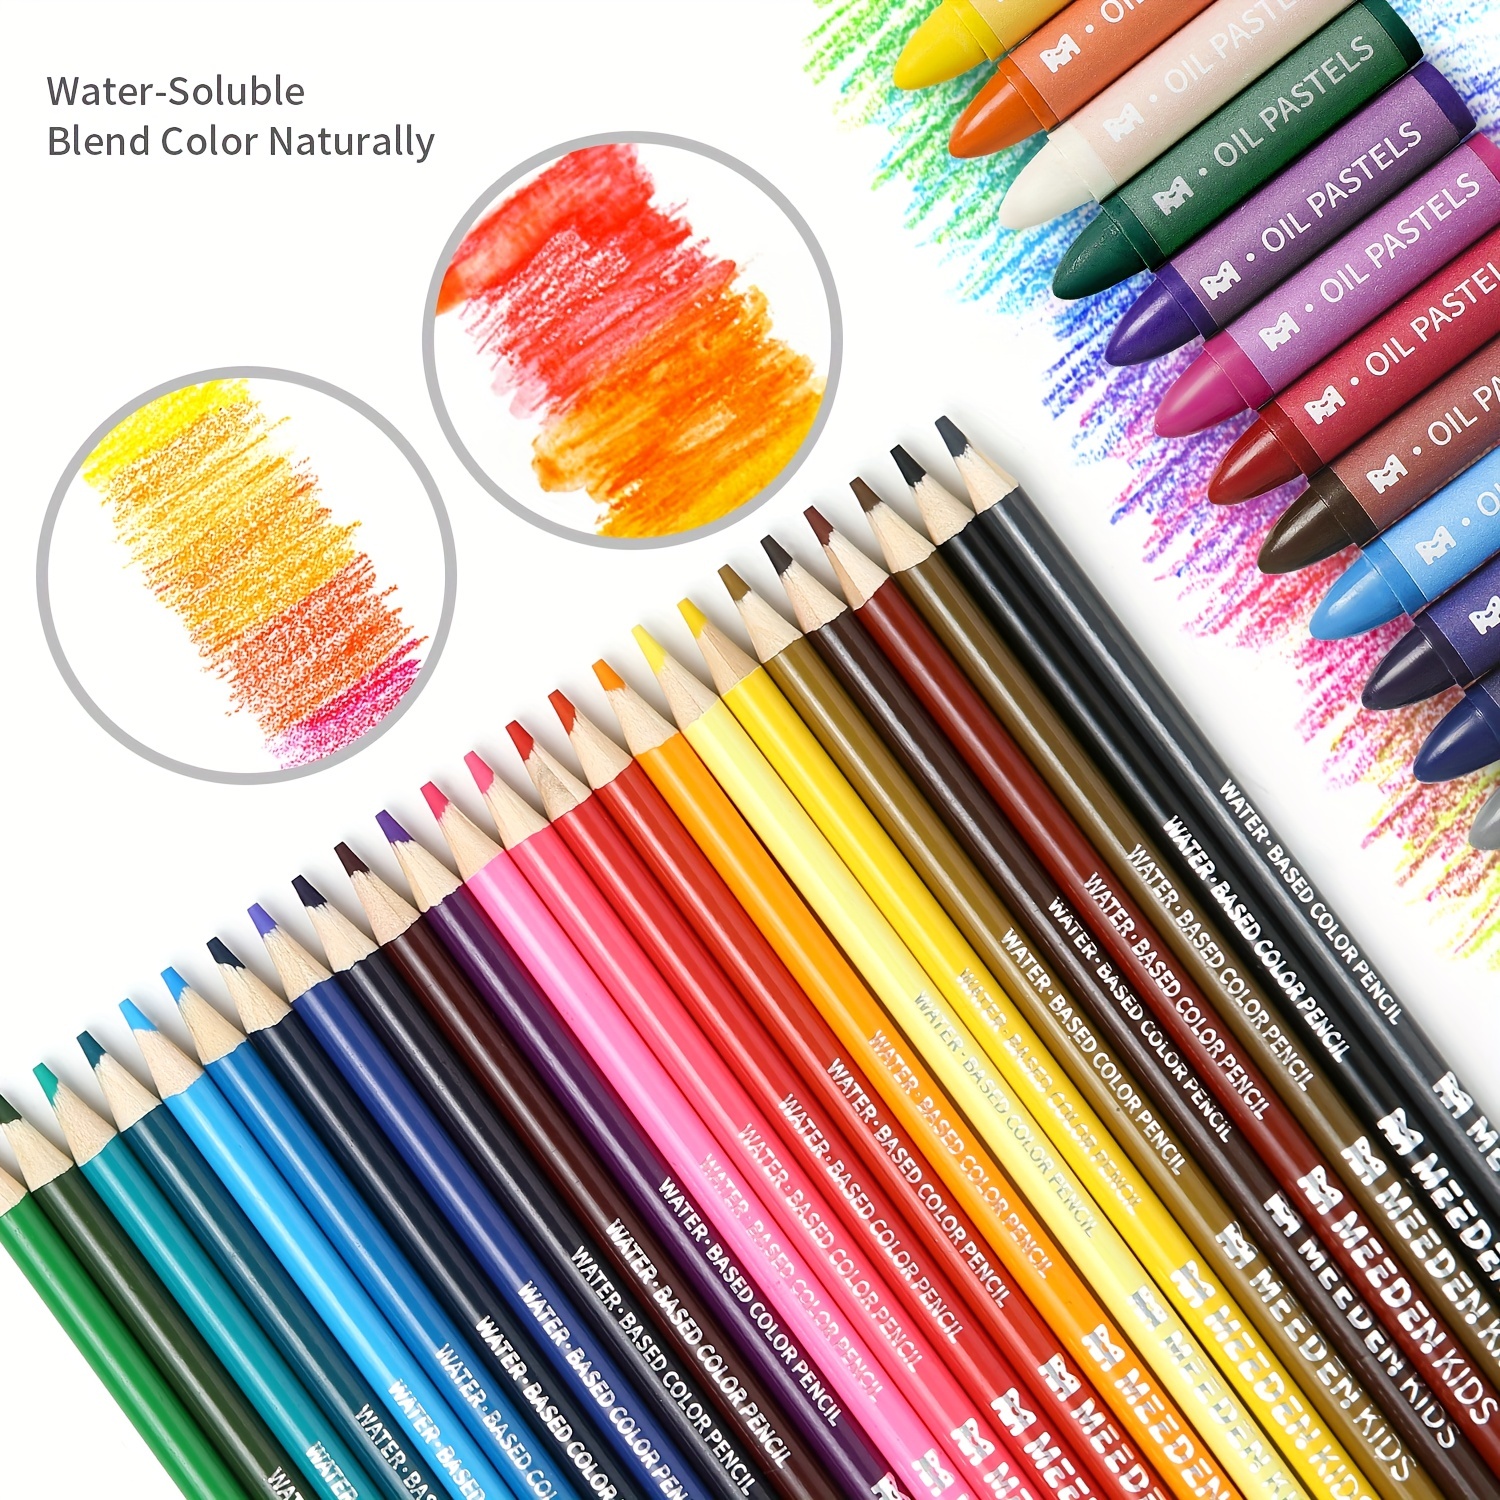 168pc Children Drawing Pen Art Set Kit for Boy Girl Color Pencils Painting  Crayon Oil Pastel Water Kids Christmas Gift 